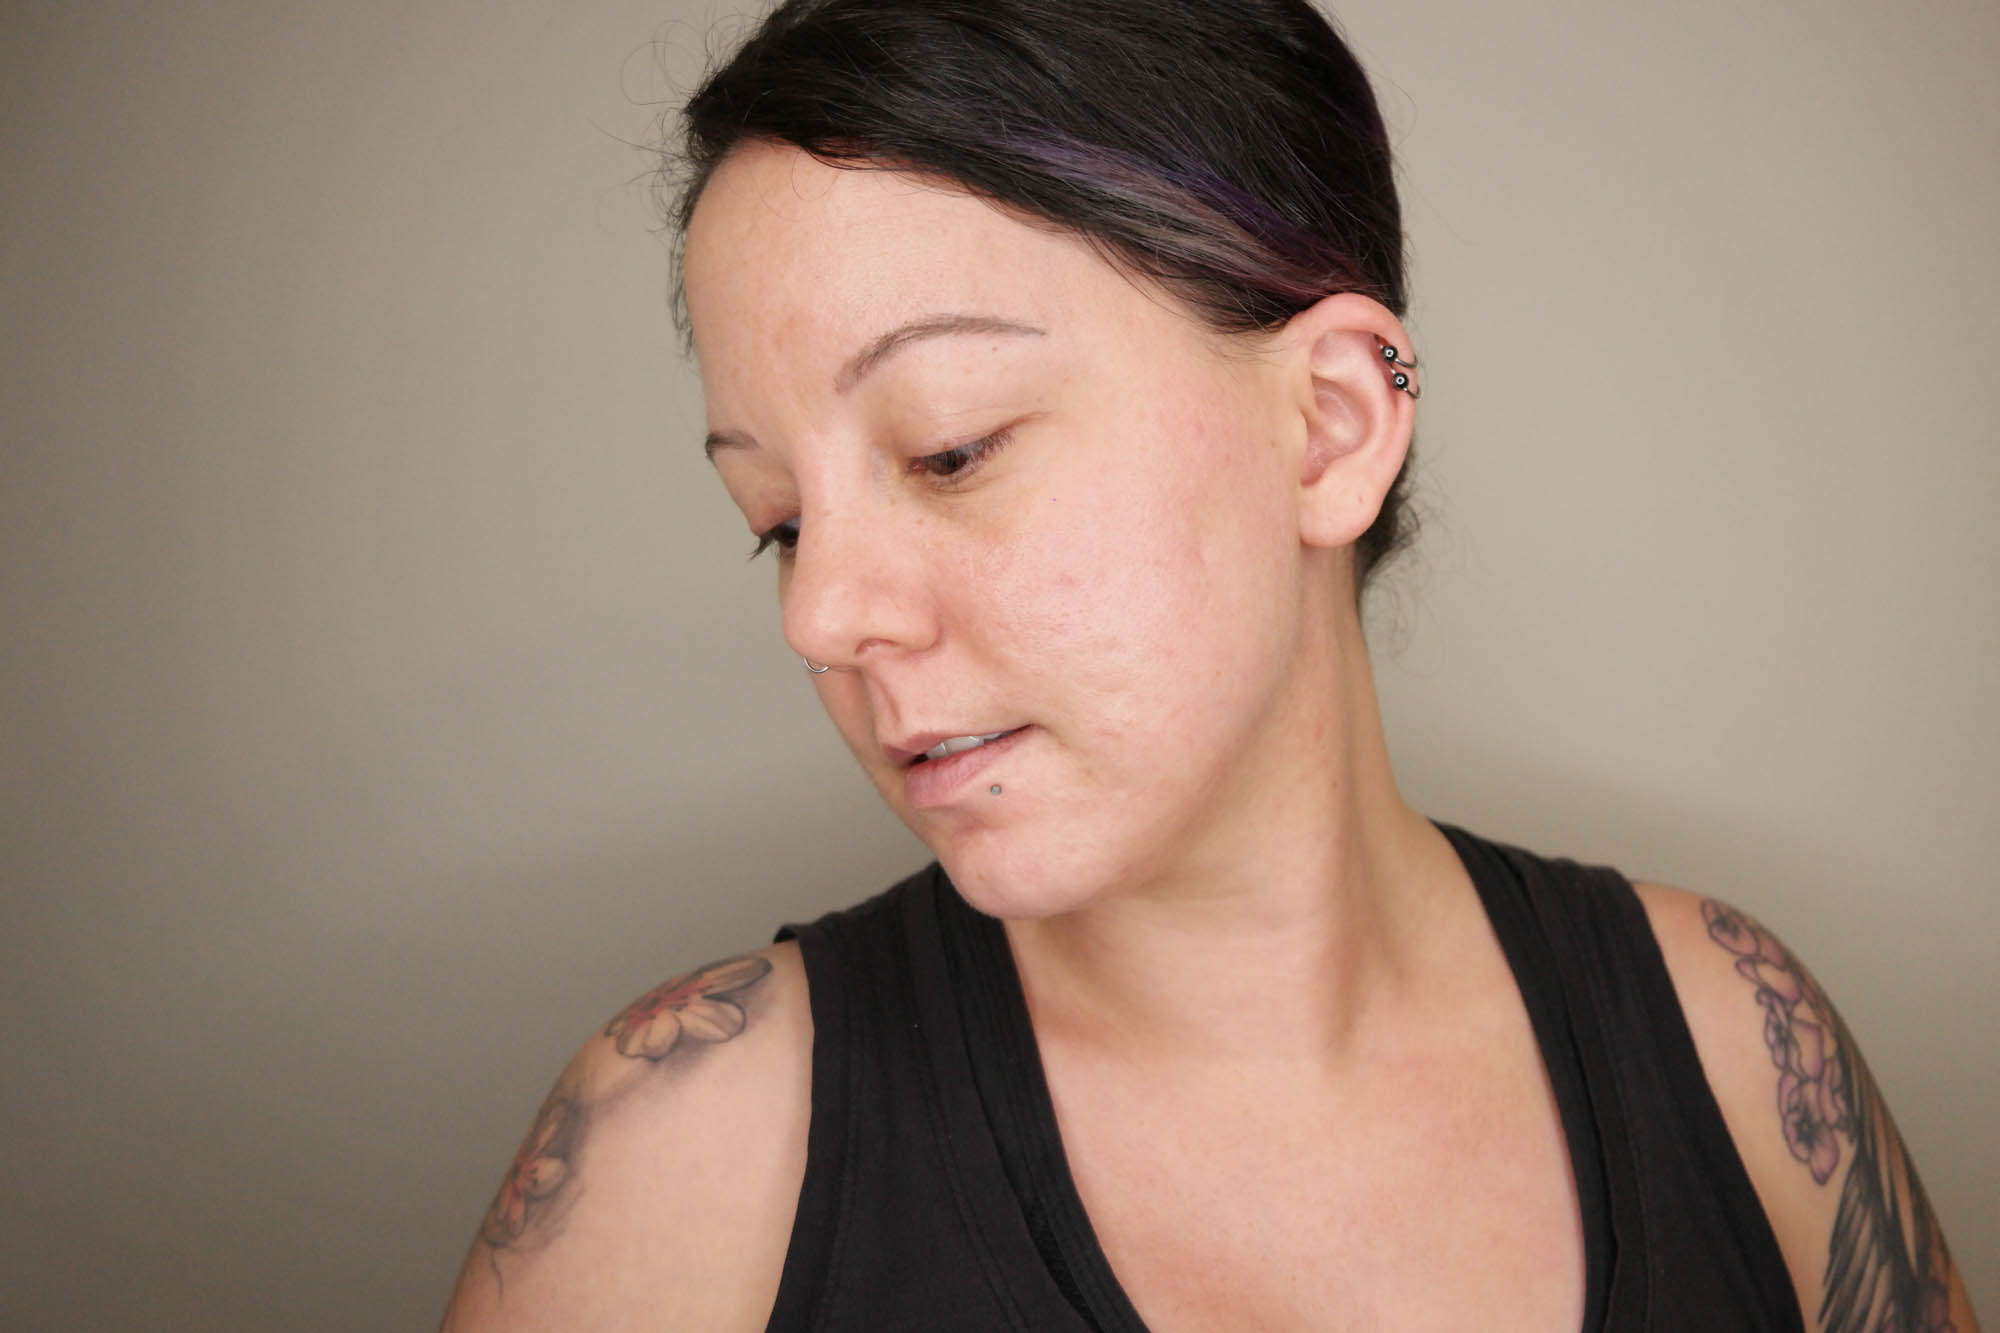 Retinoid update: how I got rid of acne discoloration